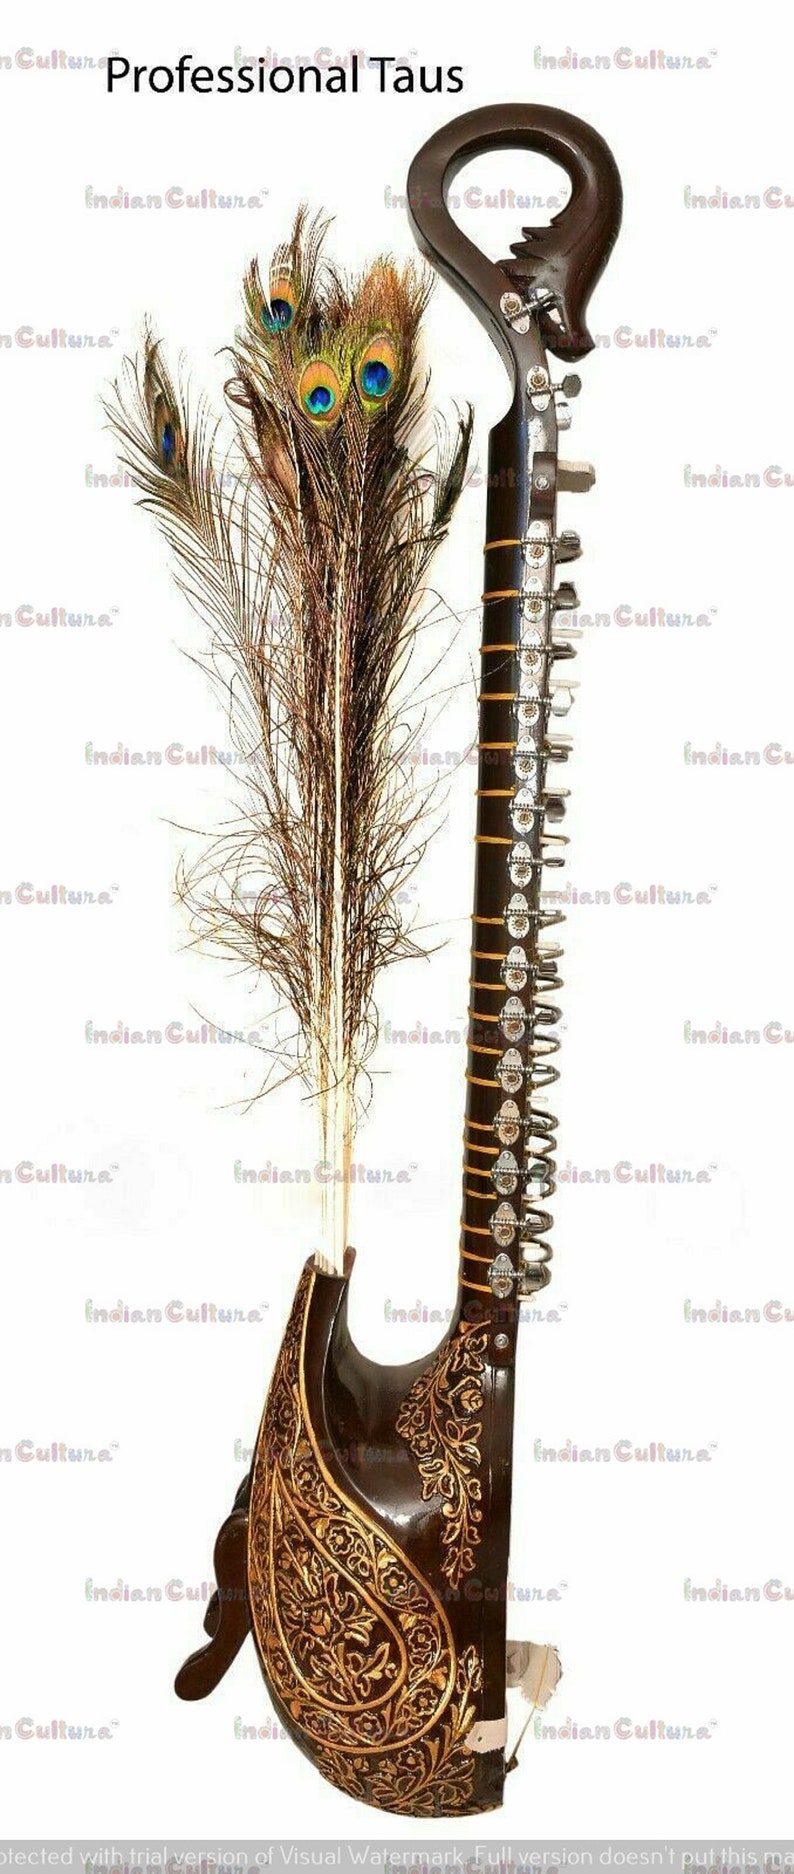 Professional Mayuri Veena Peacock Shaped Body Instrument Taus With Fiber Case Musician gift Decorative veena Exotic instrument Carved veena image 6